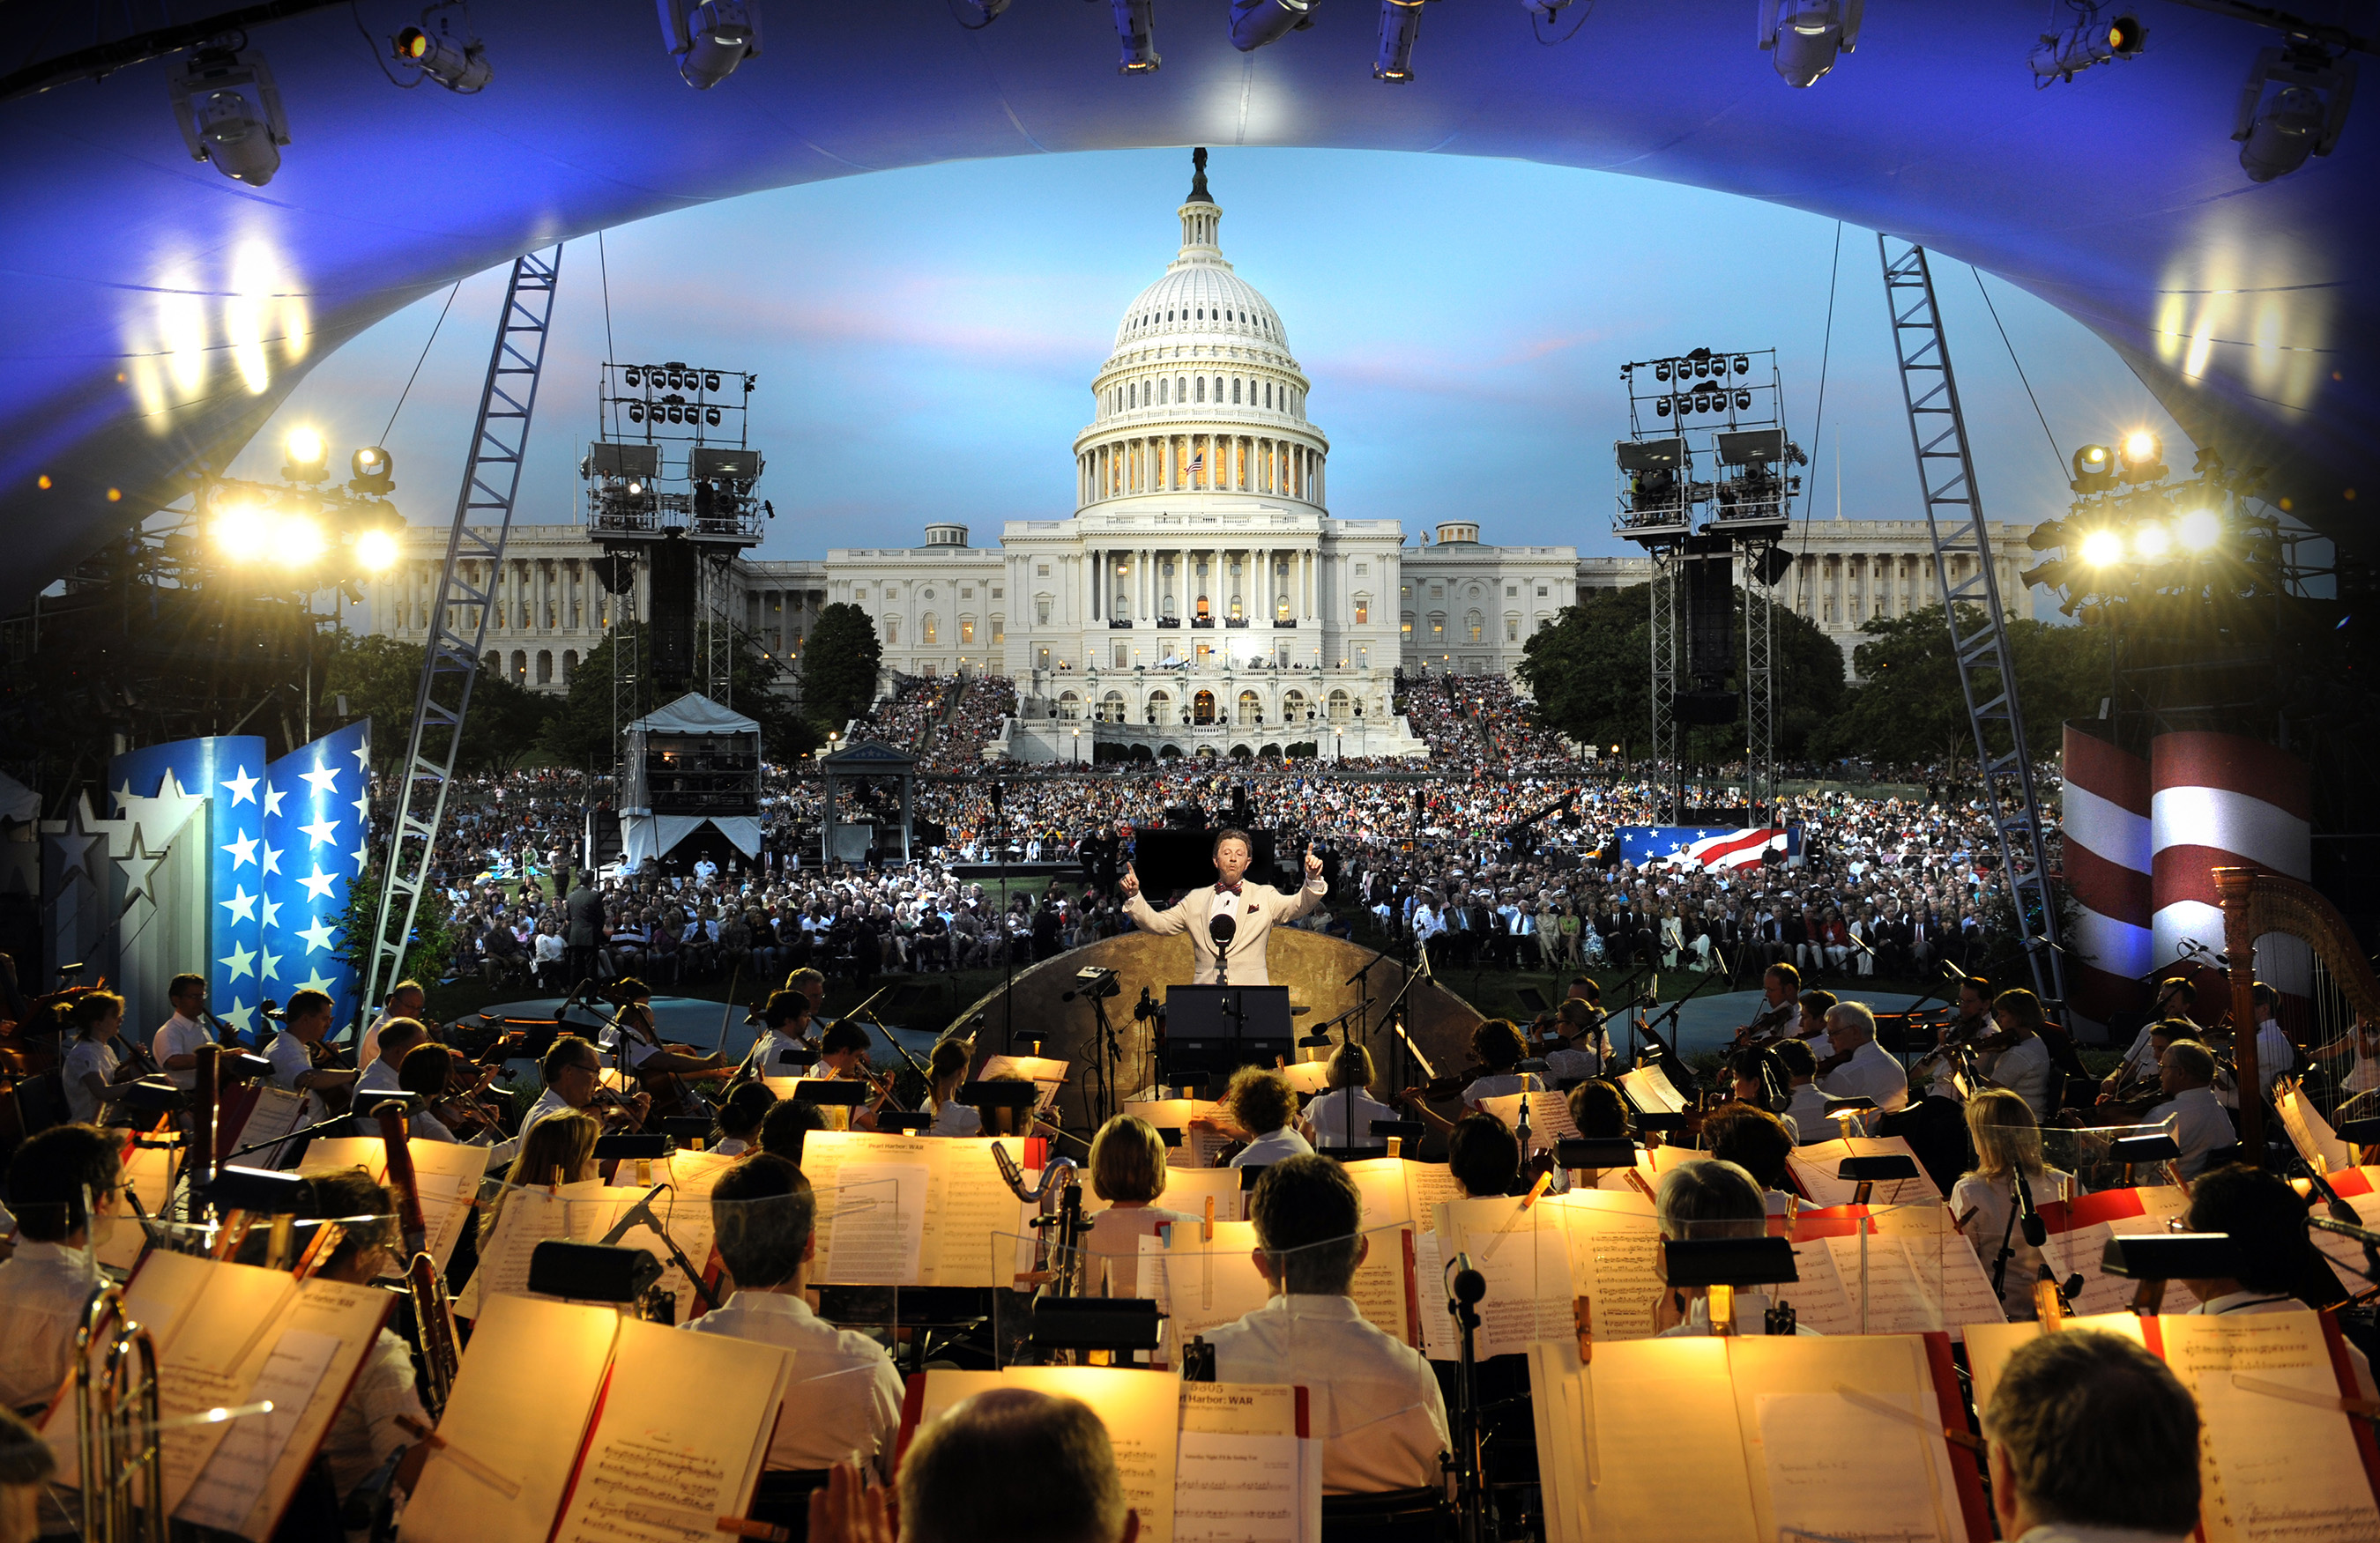 PBS's multi award-winning NATIONAL MEMORIAL DAY CONCERT returns live from the West Lawn of the U.S. Capitol for a special 30th anniversary broadcast Sunday, May 26, 2019 from 8:00 to 9:30 p.m. ET.